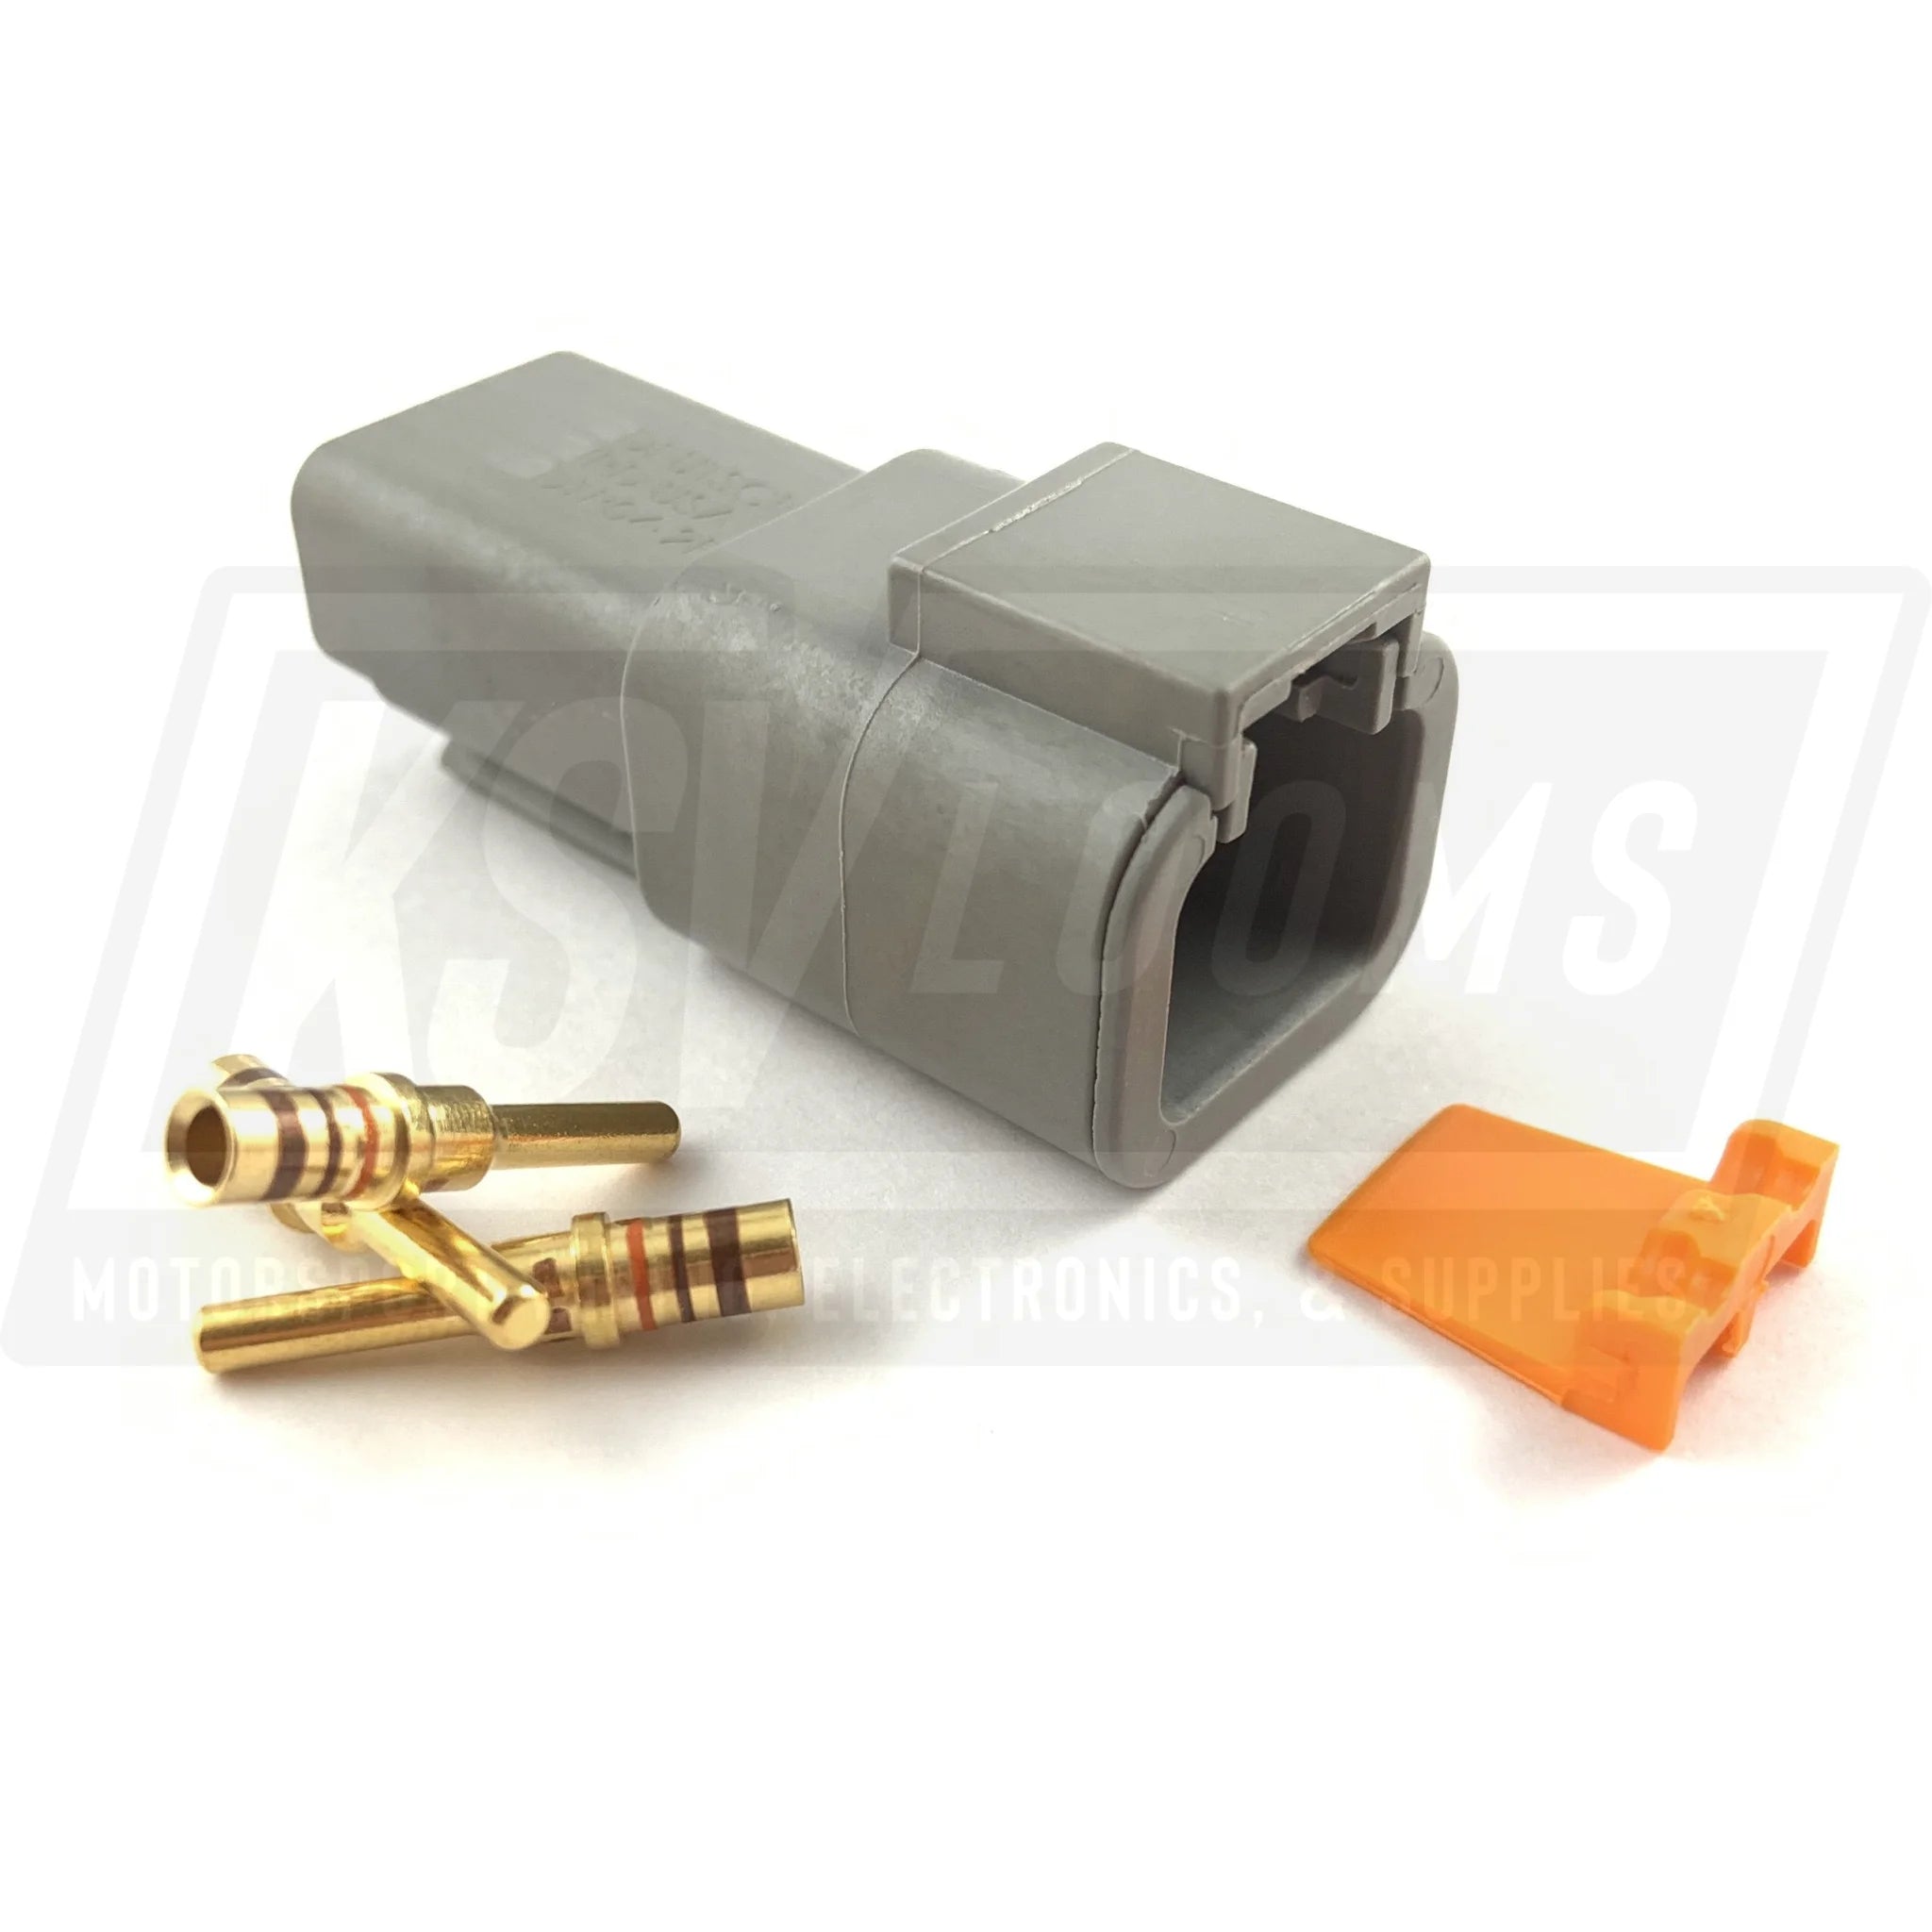 Deutsch Dtp 2-Way Pin Receptacle Connector Kit (14-12 Awg Gold Contacts)